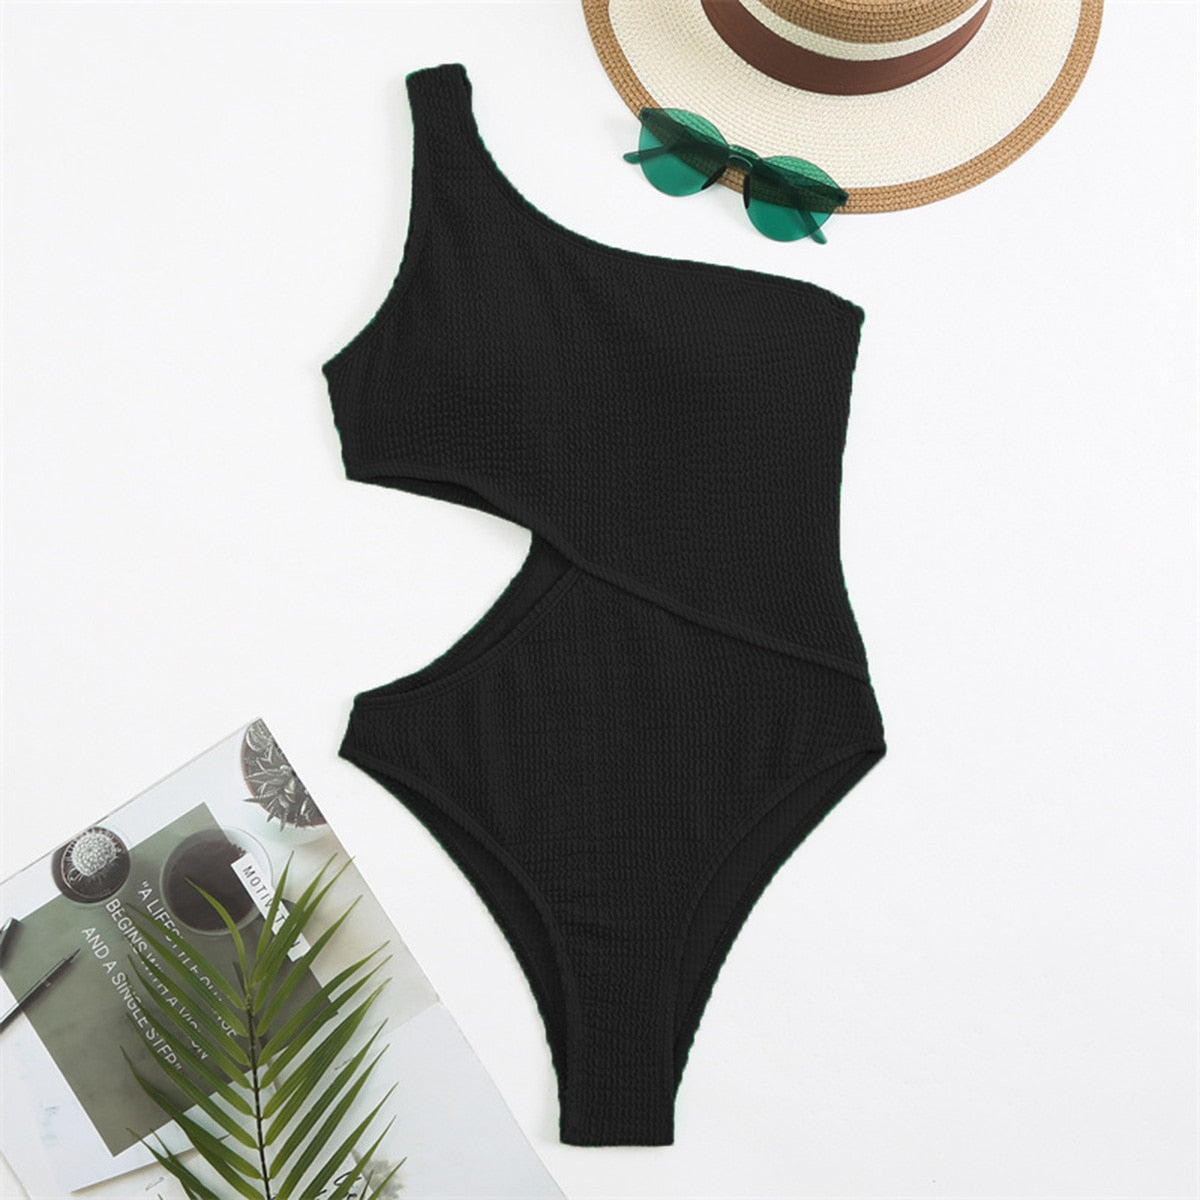 One Piece Swimsuit One Shoulder Solid Swimwear Ribbed Monokini Bathing Suit Beachwear Swimming Suits The Clothing Company Sydney